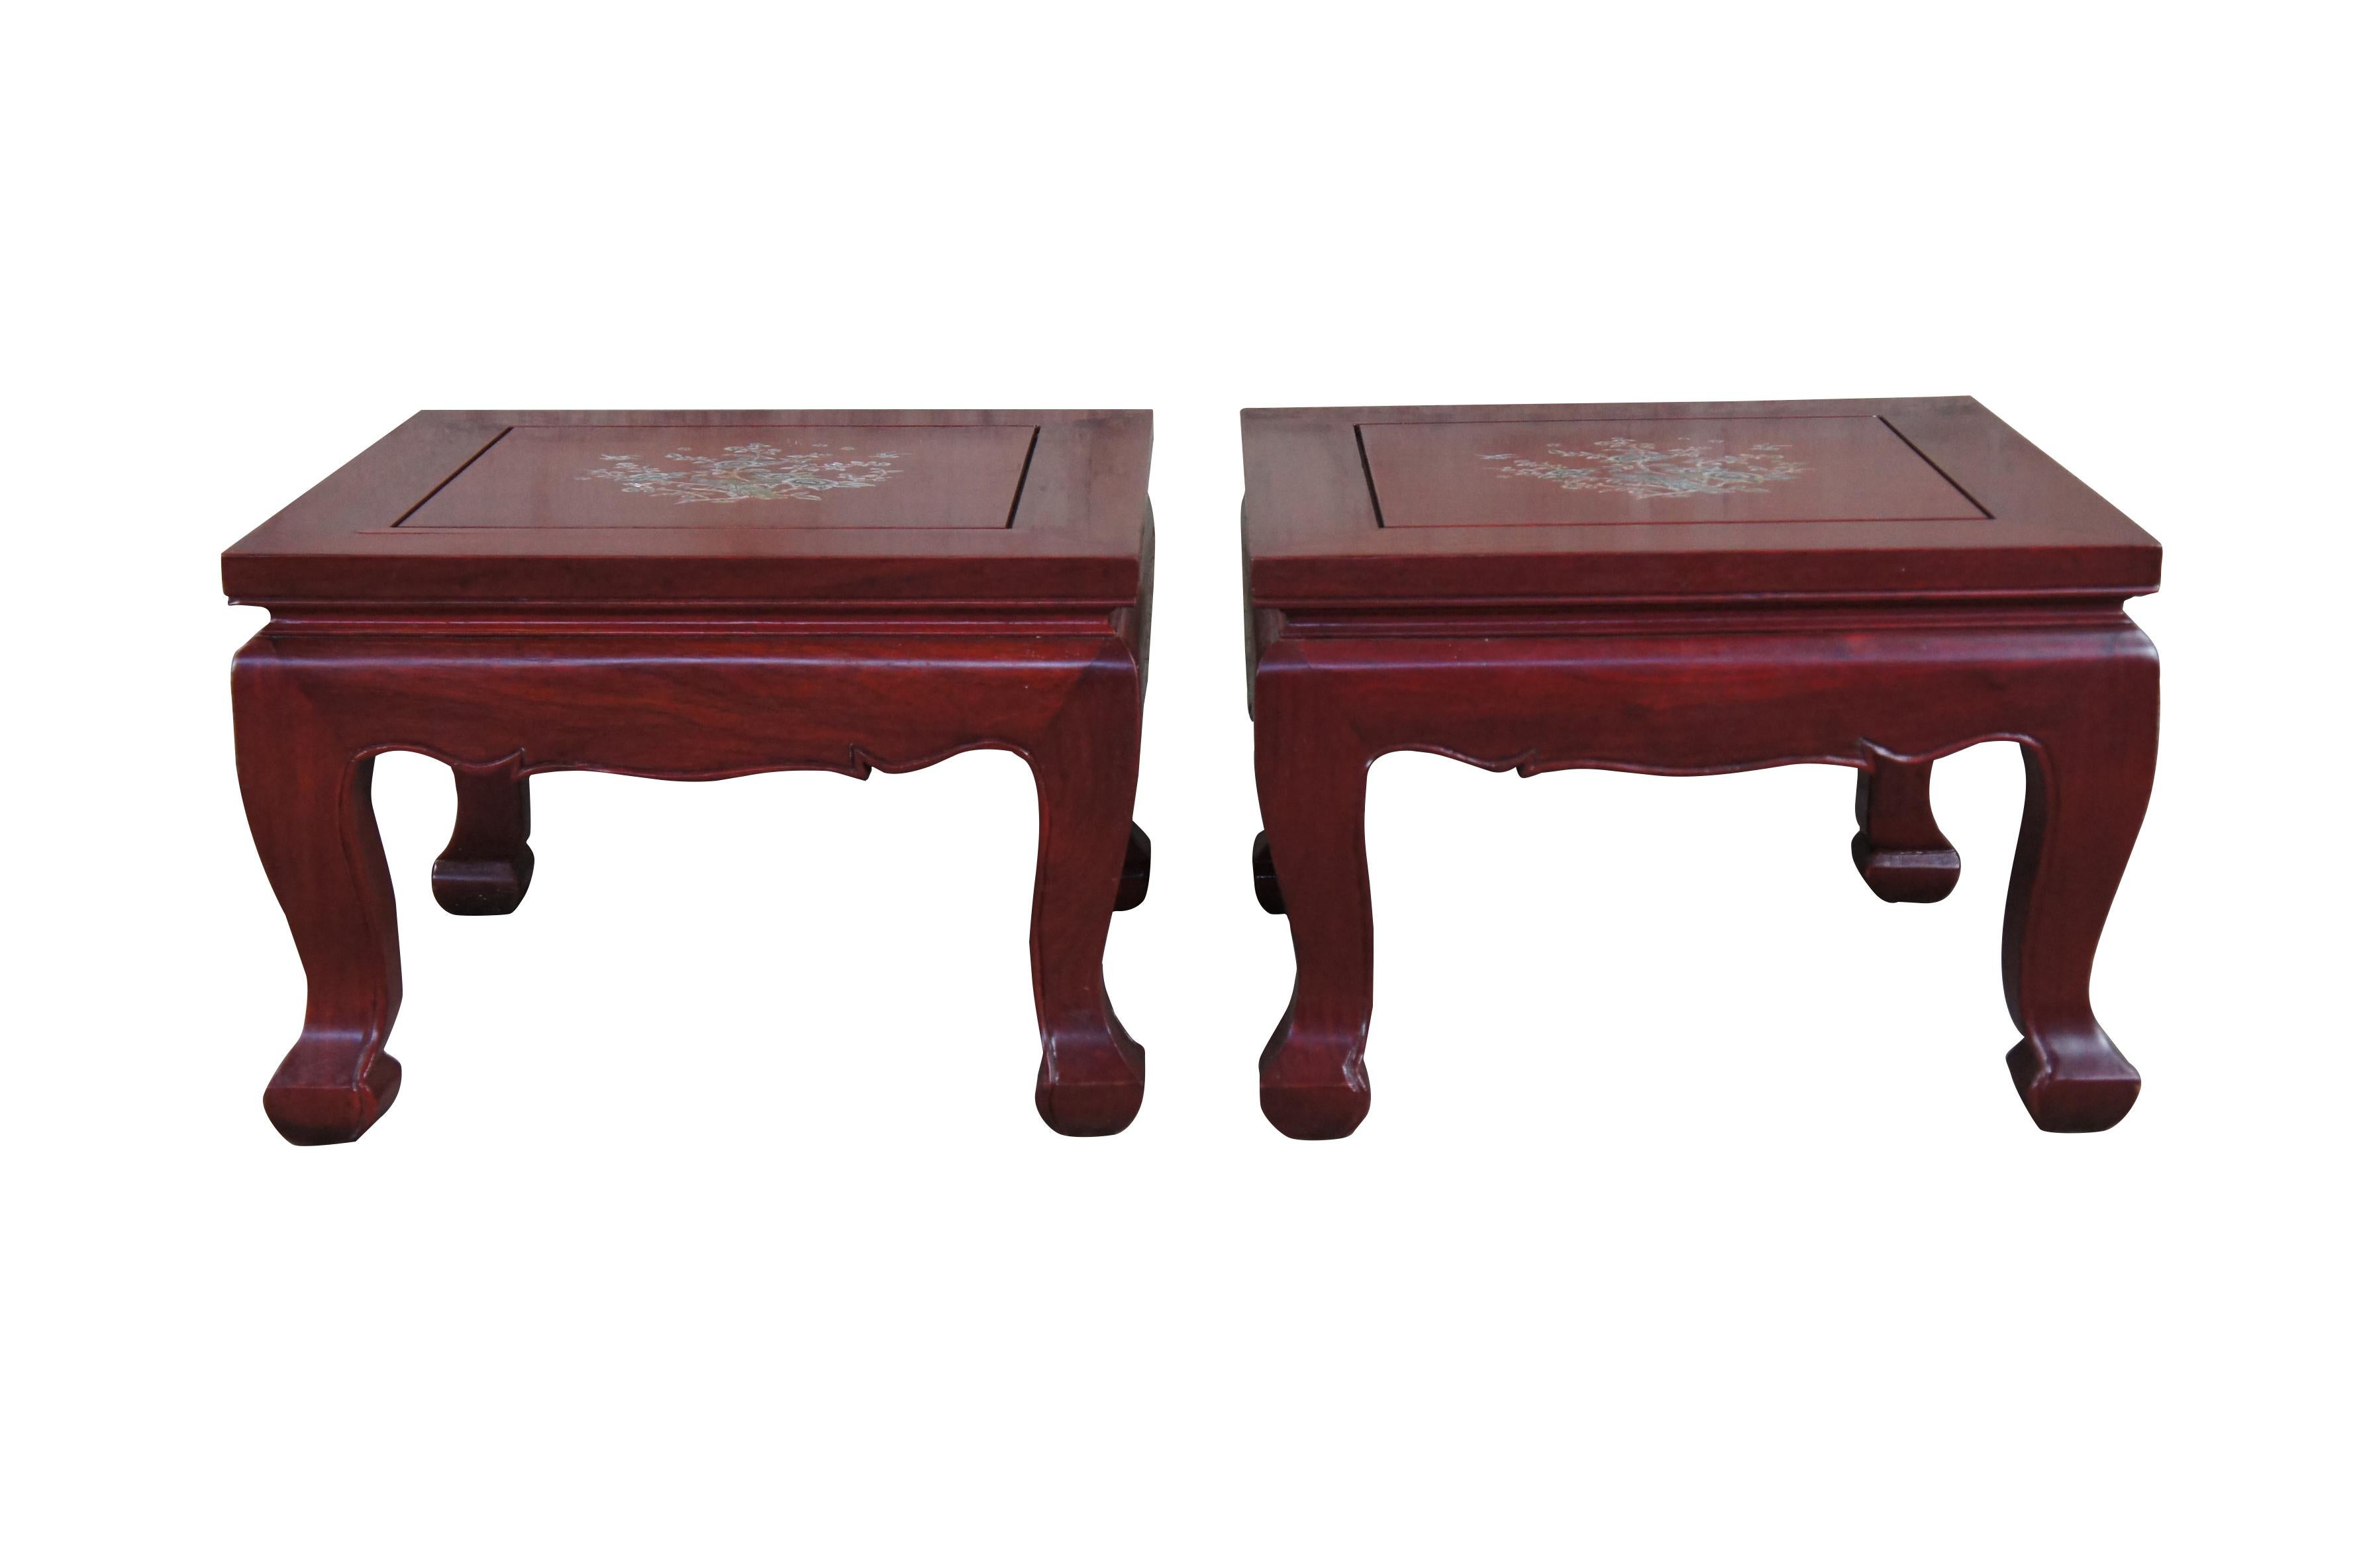 Pair of vintage Chinese Rosewood foot stools or low side tables featuring square form with inlaid MOP mother of pearl floral rose peacock and butterfly design supported by Chippendale style legs.  Great for use as plant stands or sculpture